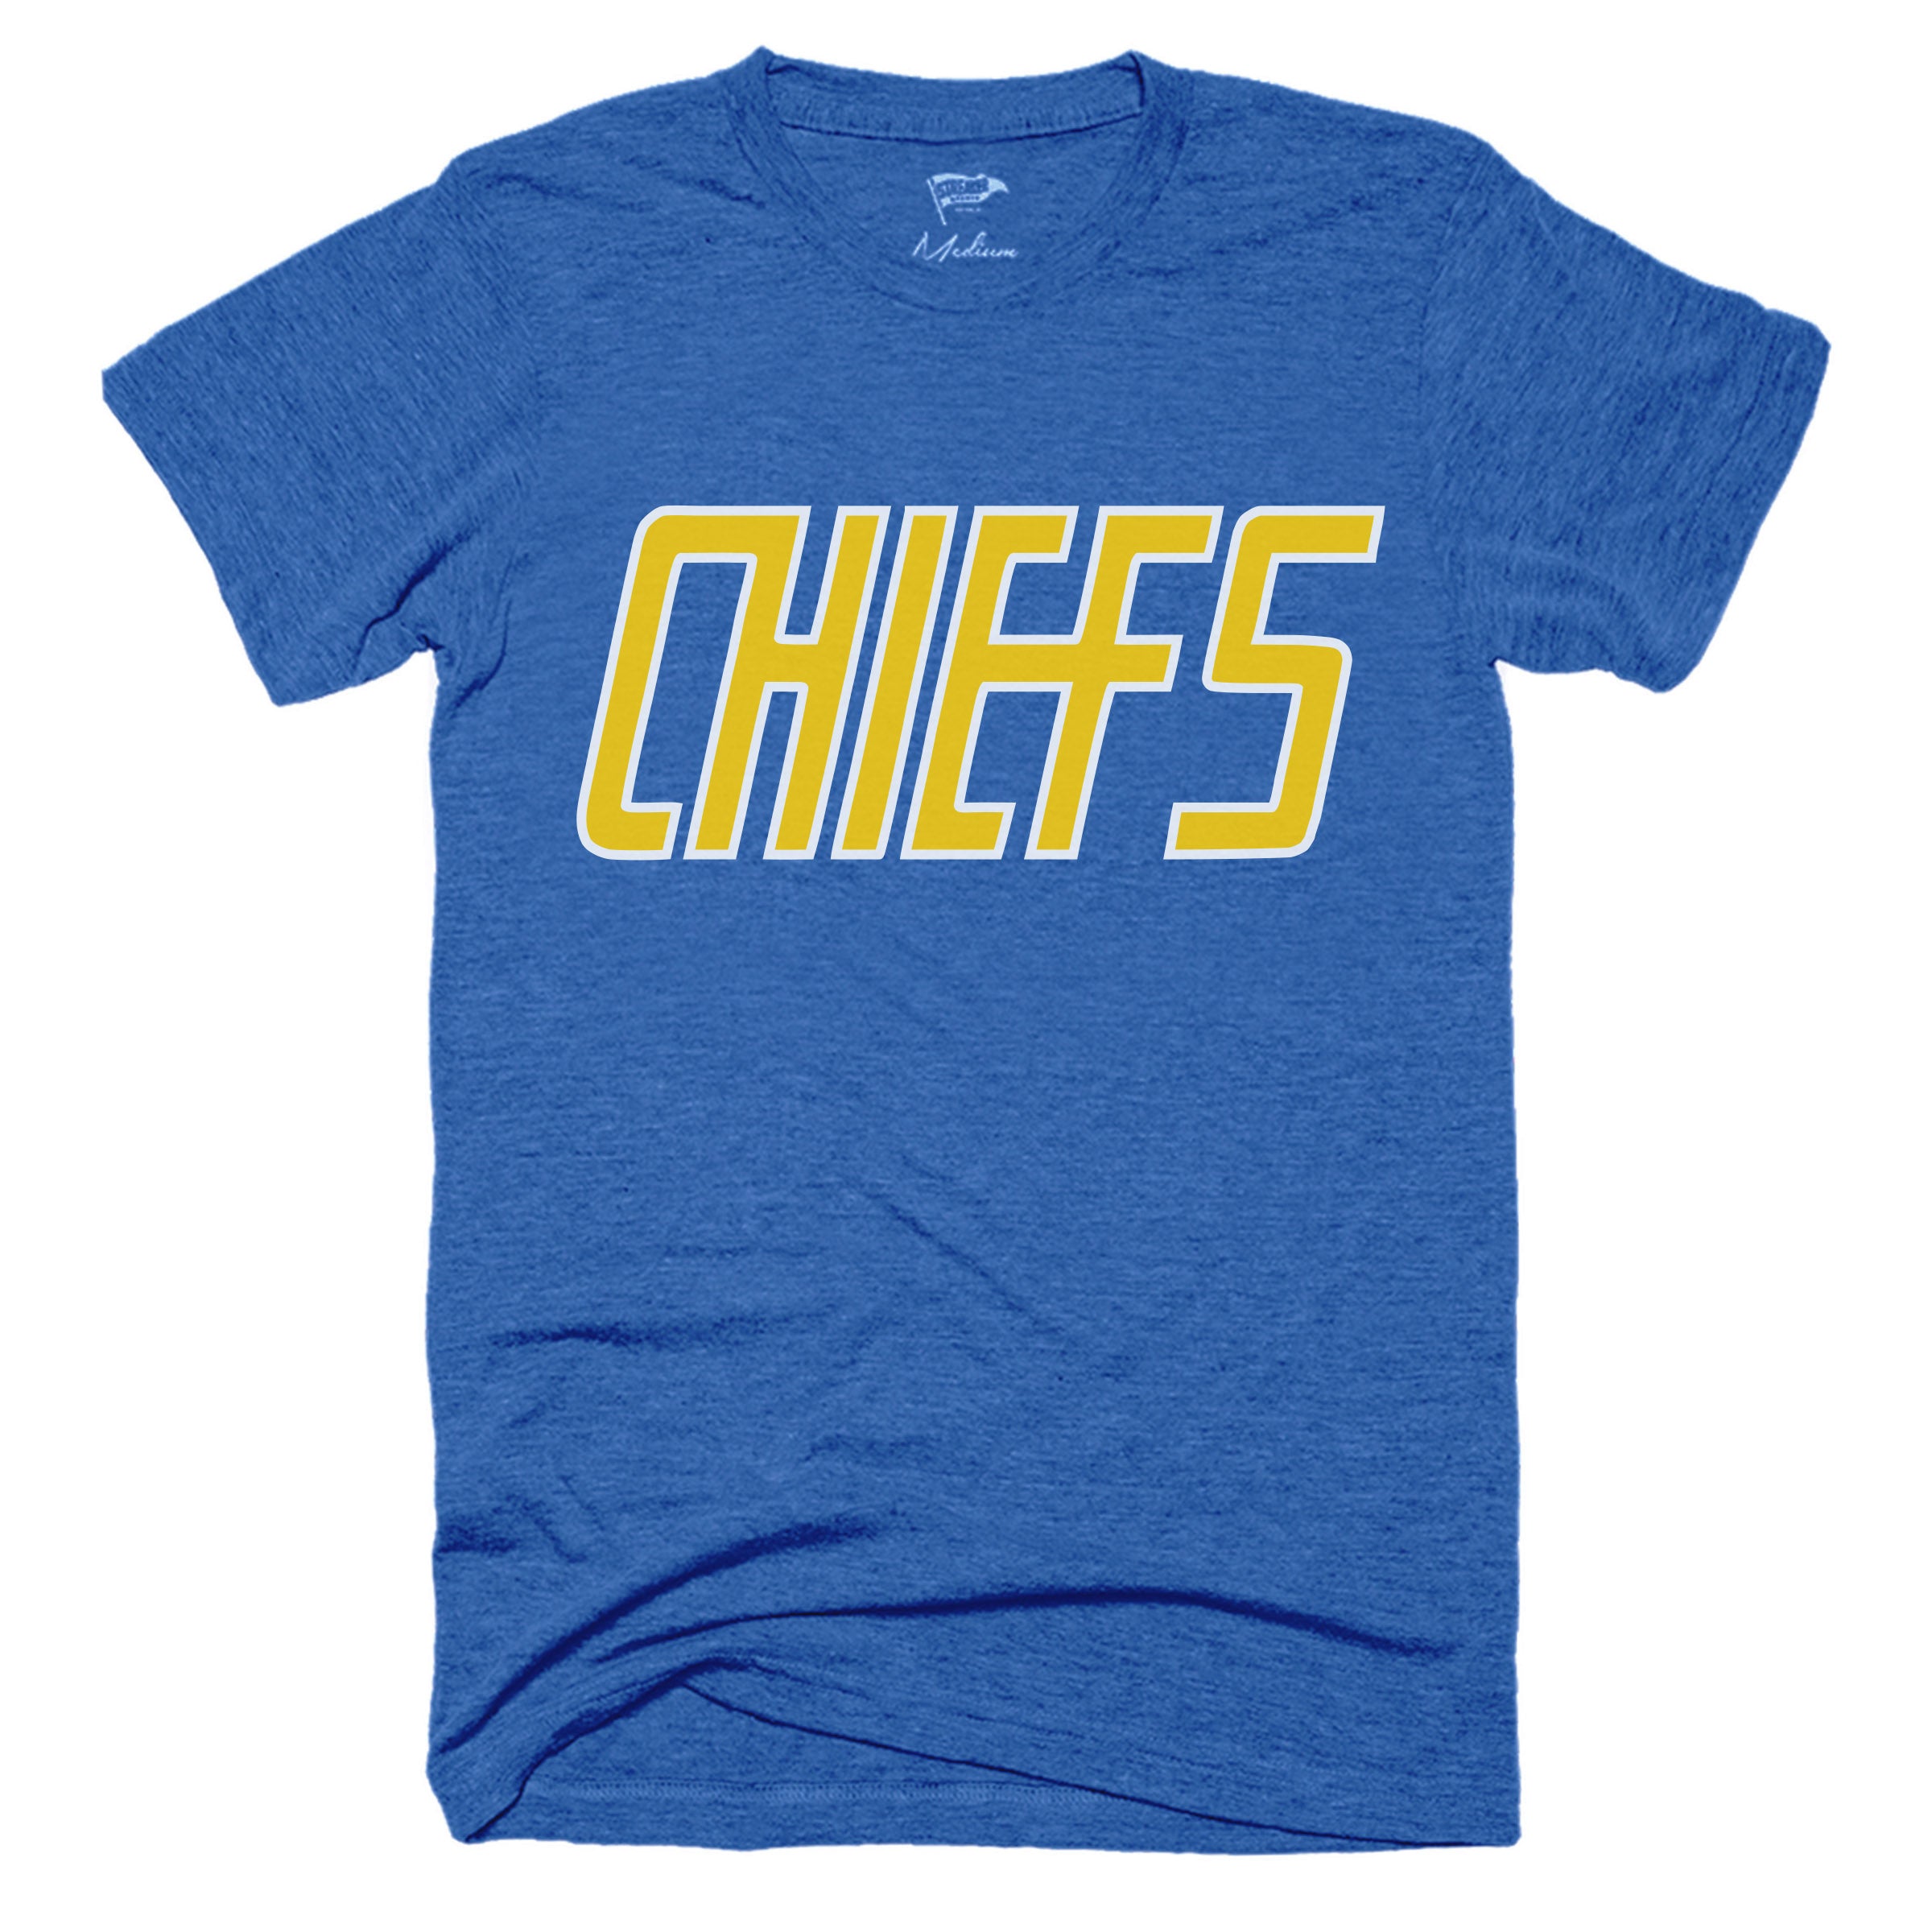 Charlestown Chiefs Gifts & Merchandise for Sale